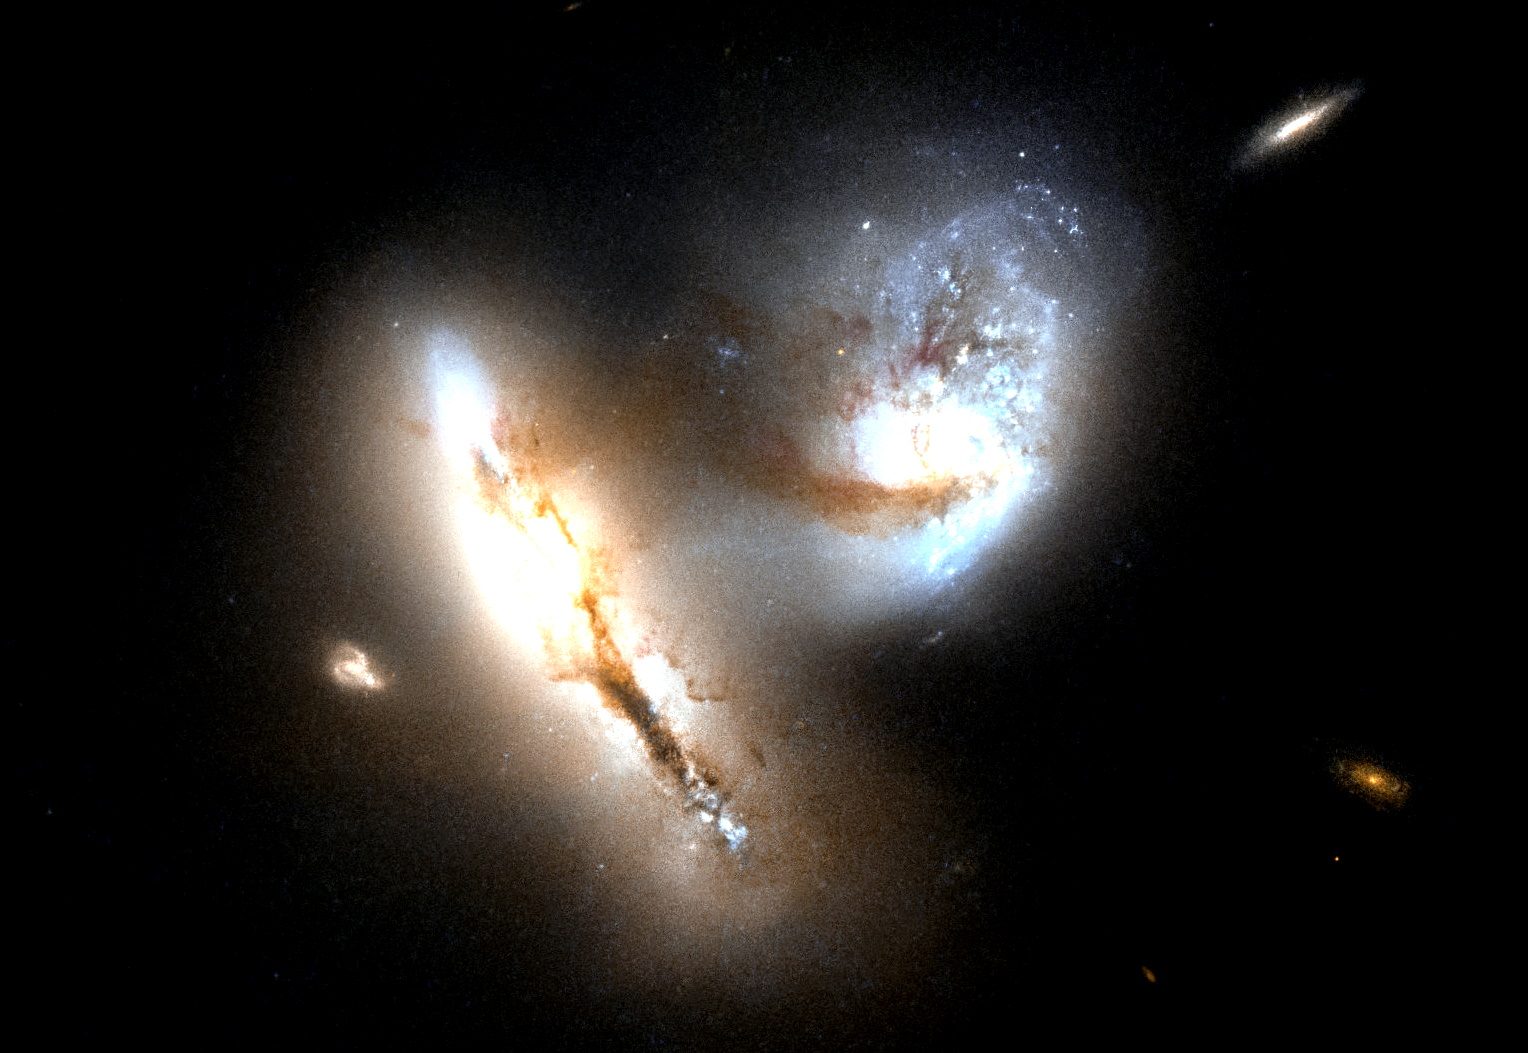 Two galaxies colliding.